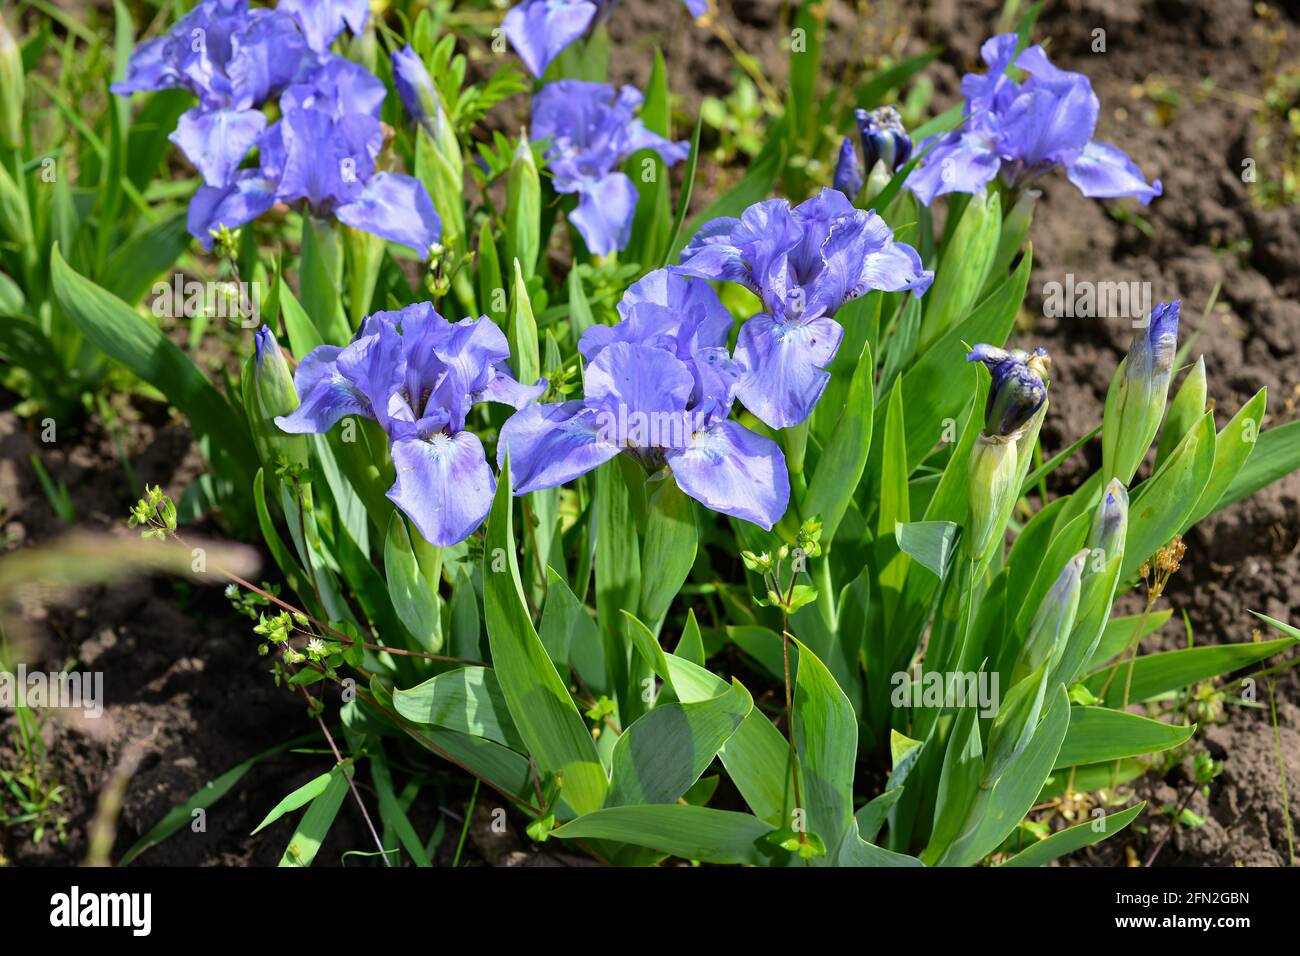 Beautiful colorful large purple iris flowers growing in a meadow in the garden. Stock Photo